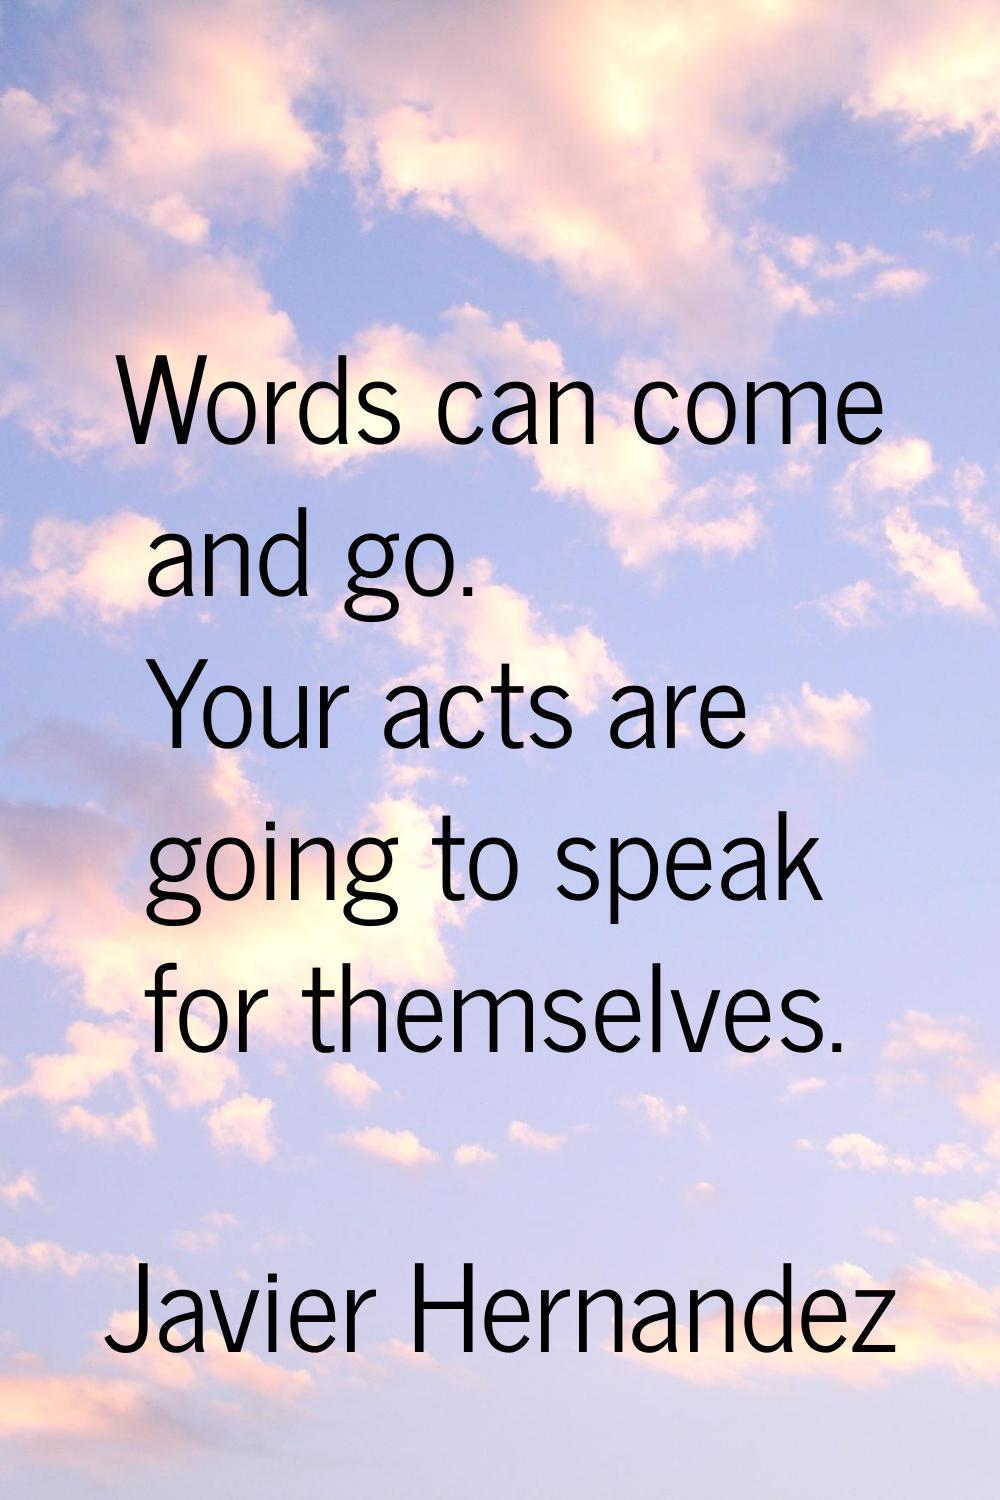 Words can come and go. Your acts are going to speak for themselves.